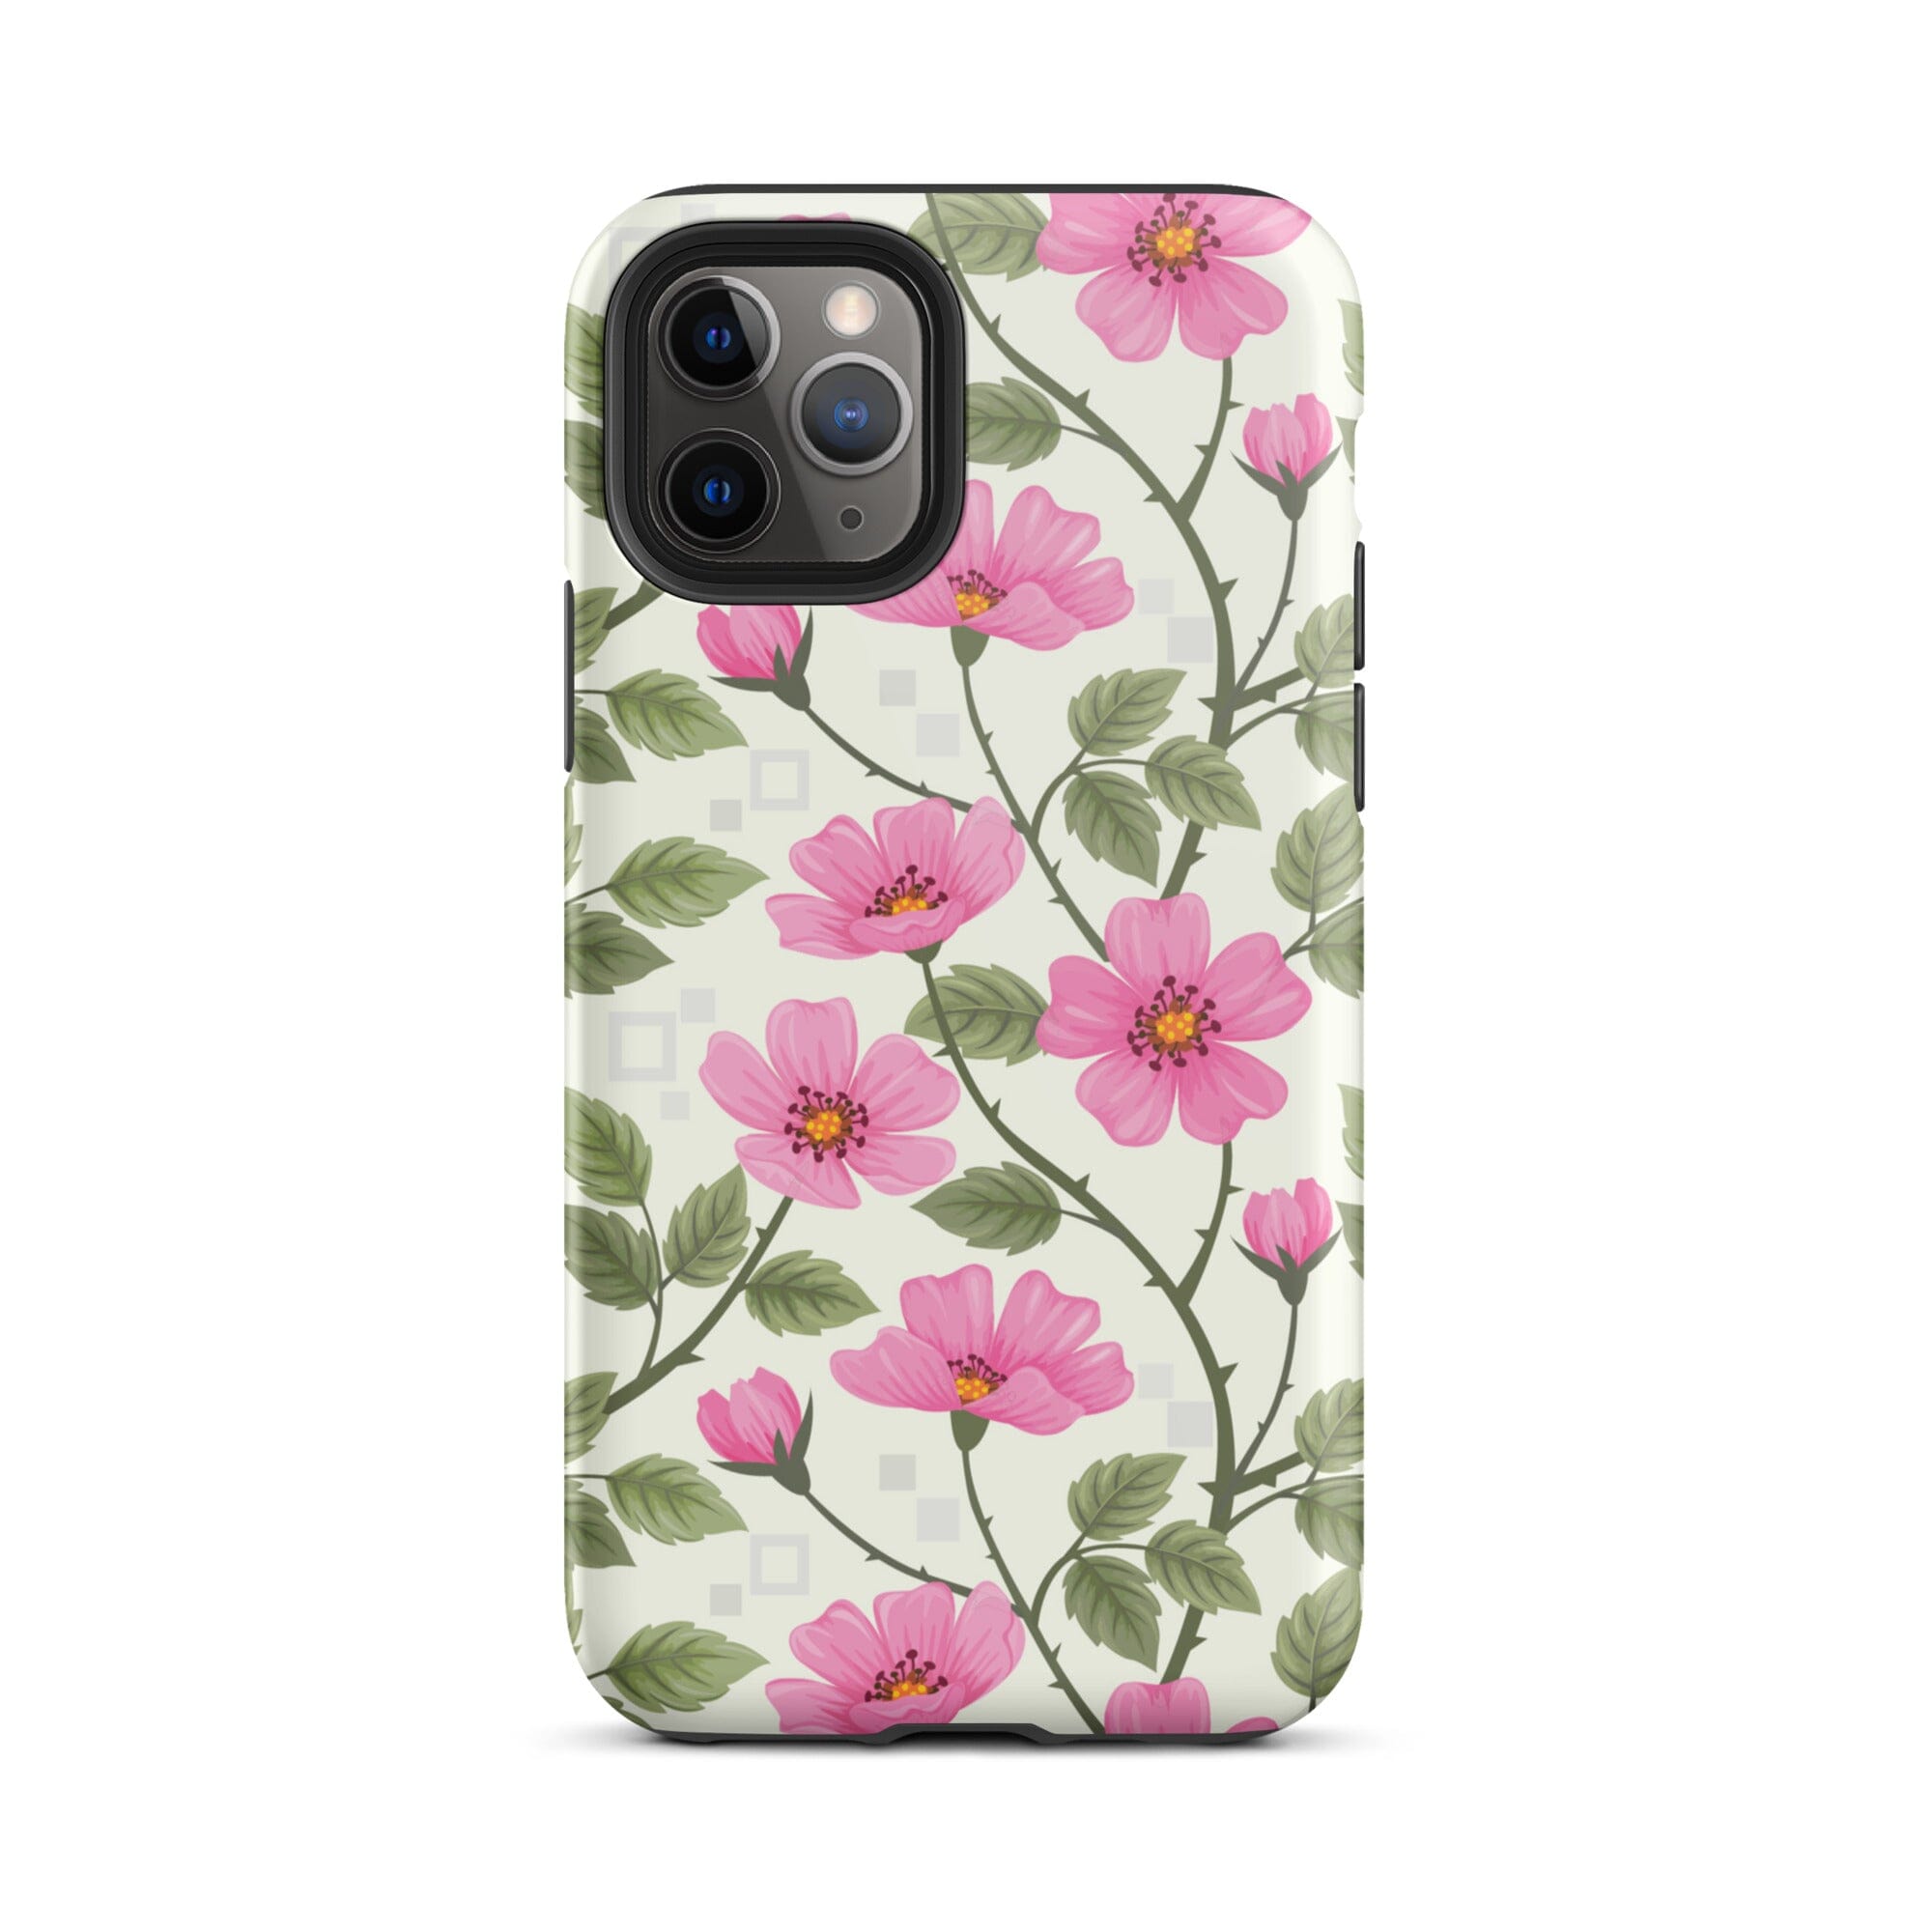 Sassy Florals iPhone Case Knitted Belle Boutique iPhone 11 